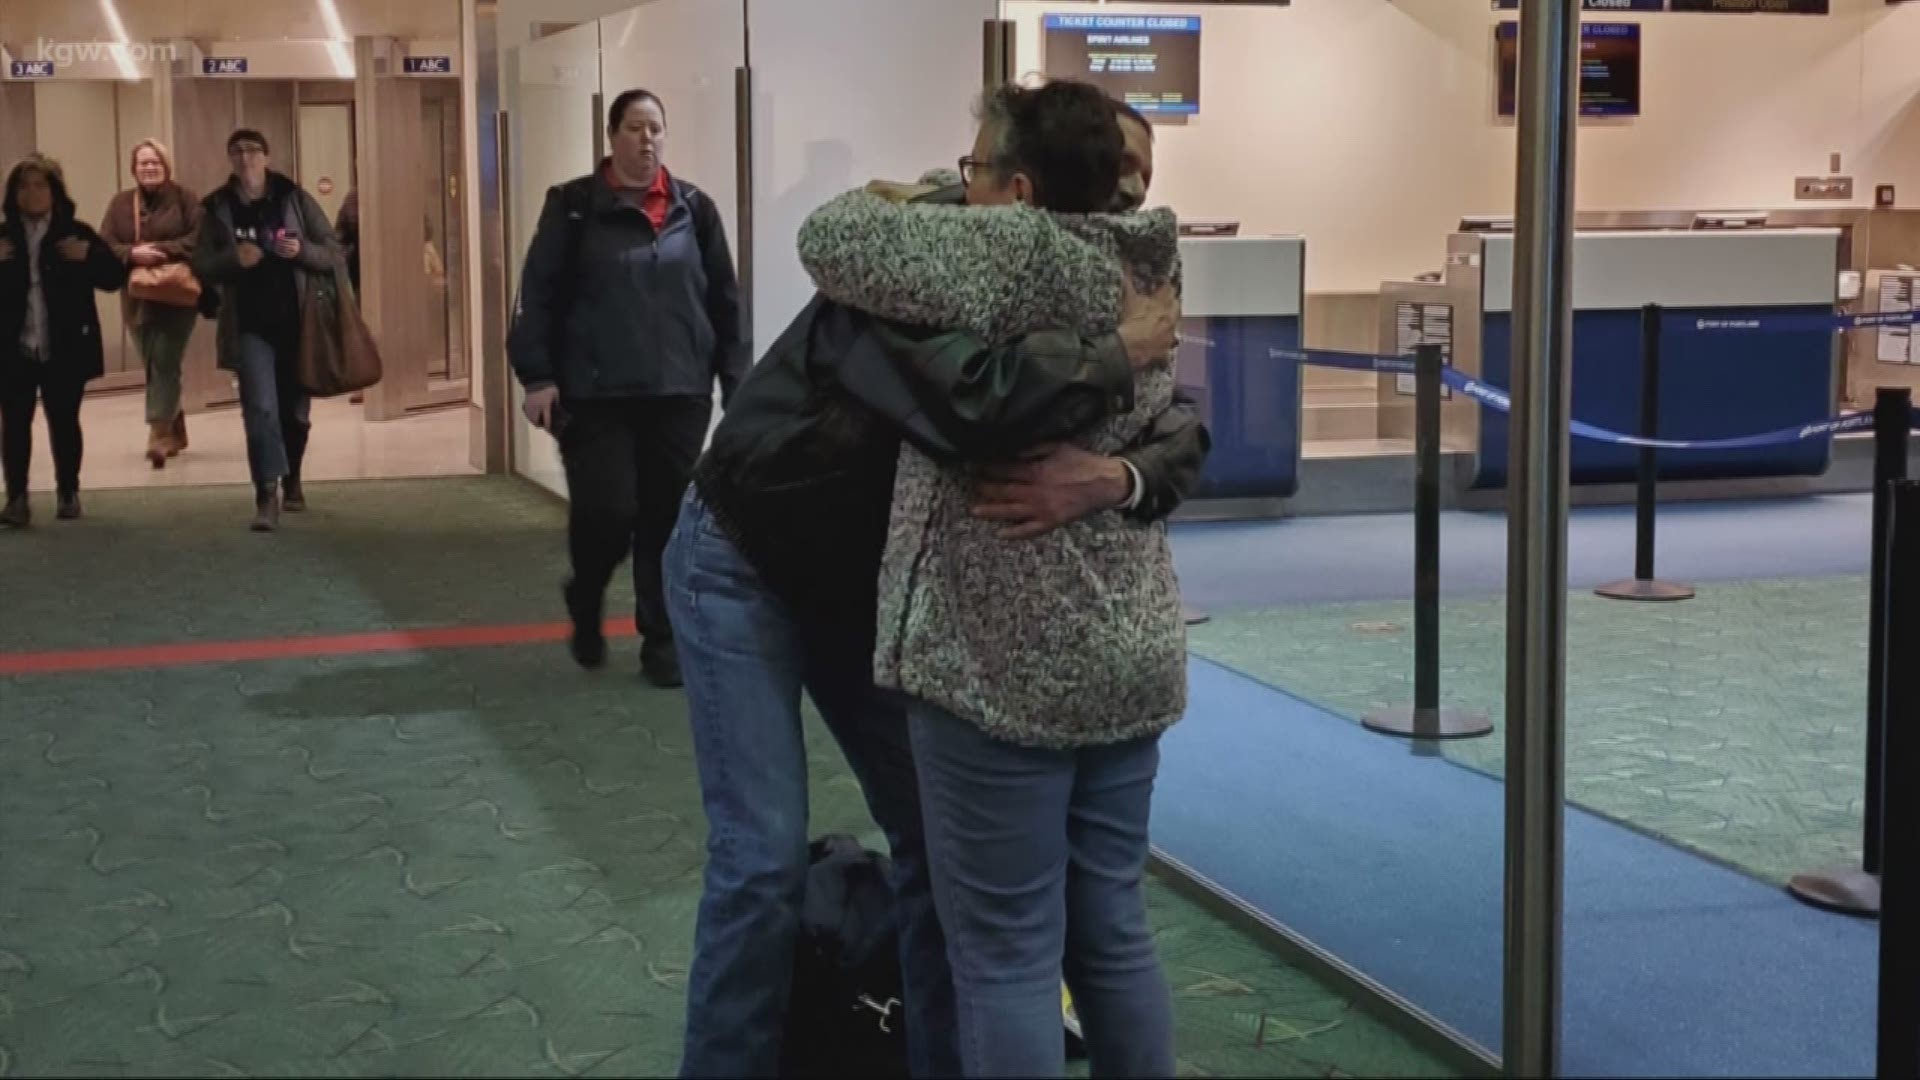 A heartwarming reunion, decades in the making as a mother and son finally find each other.